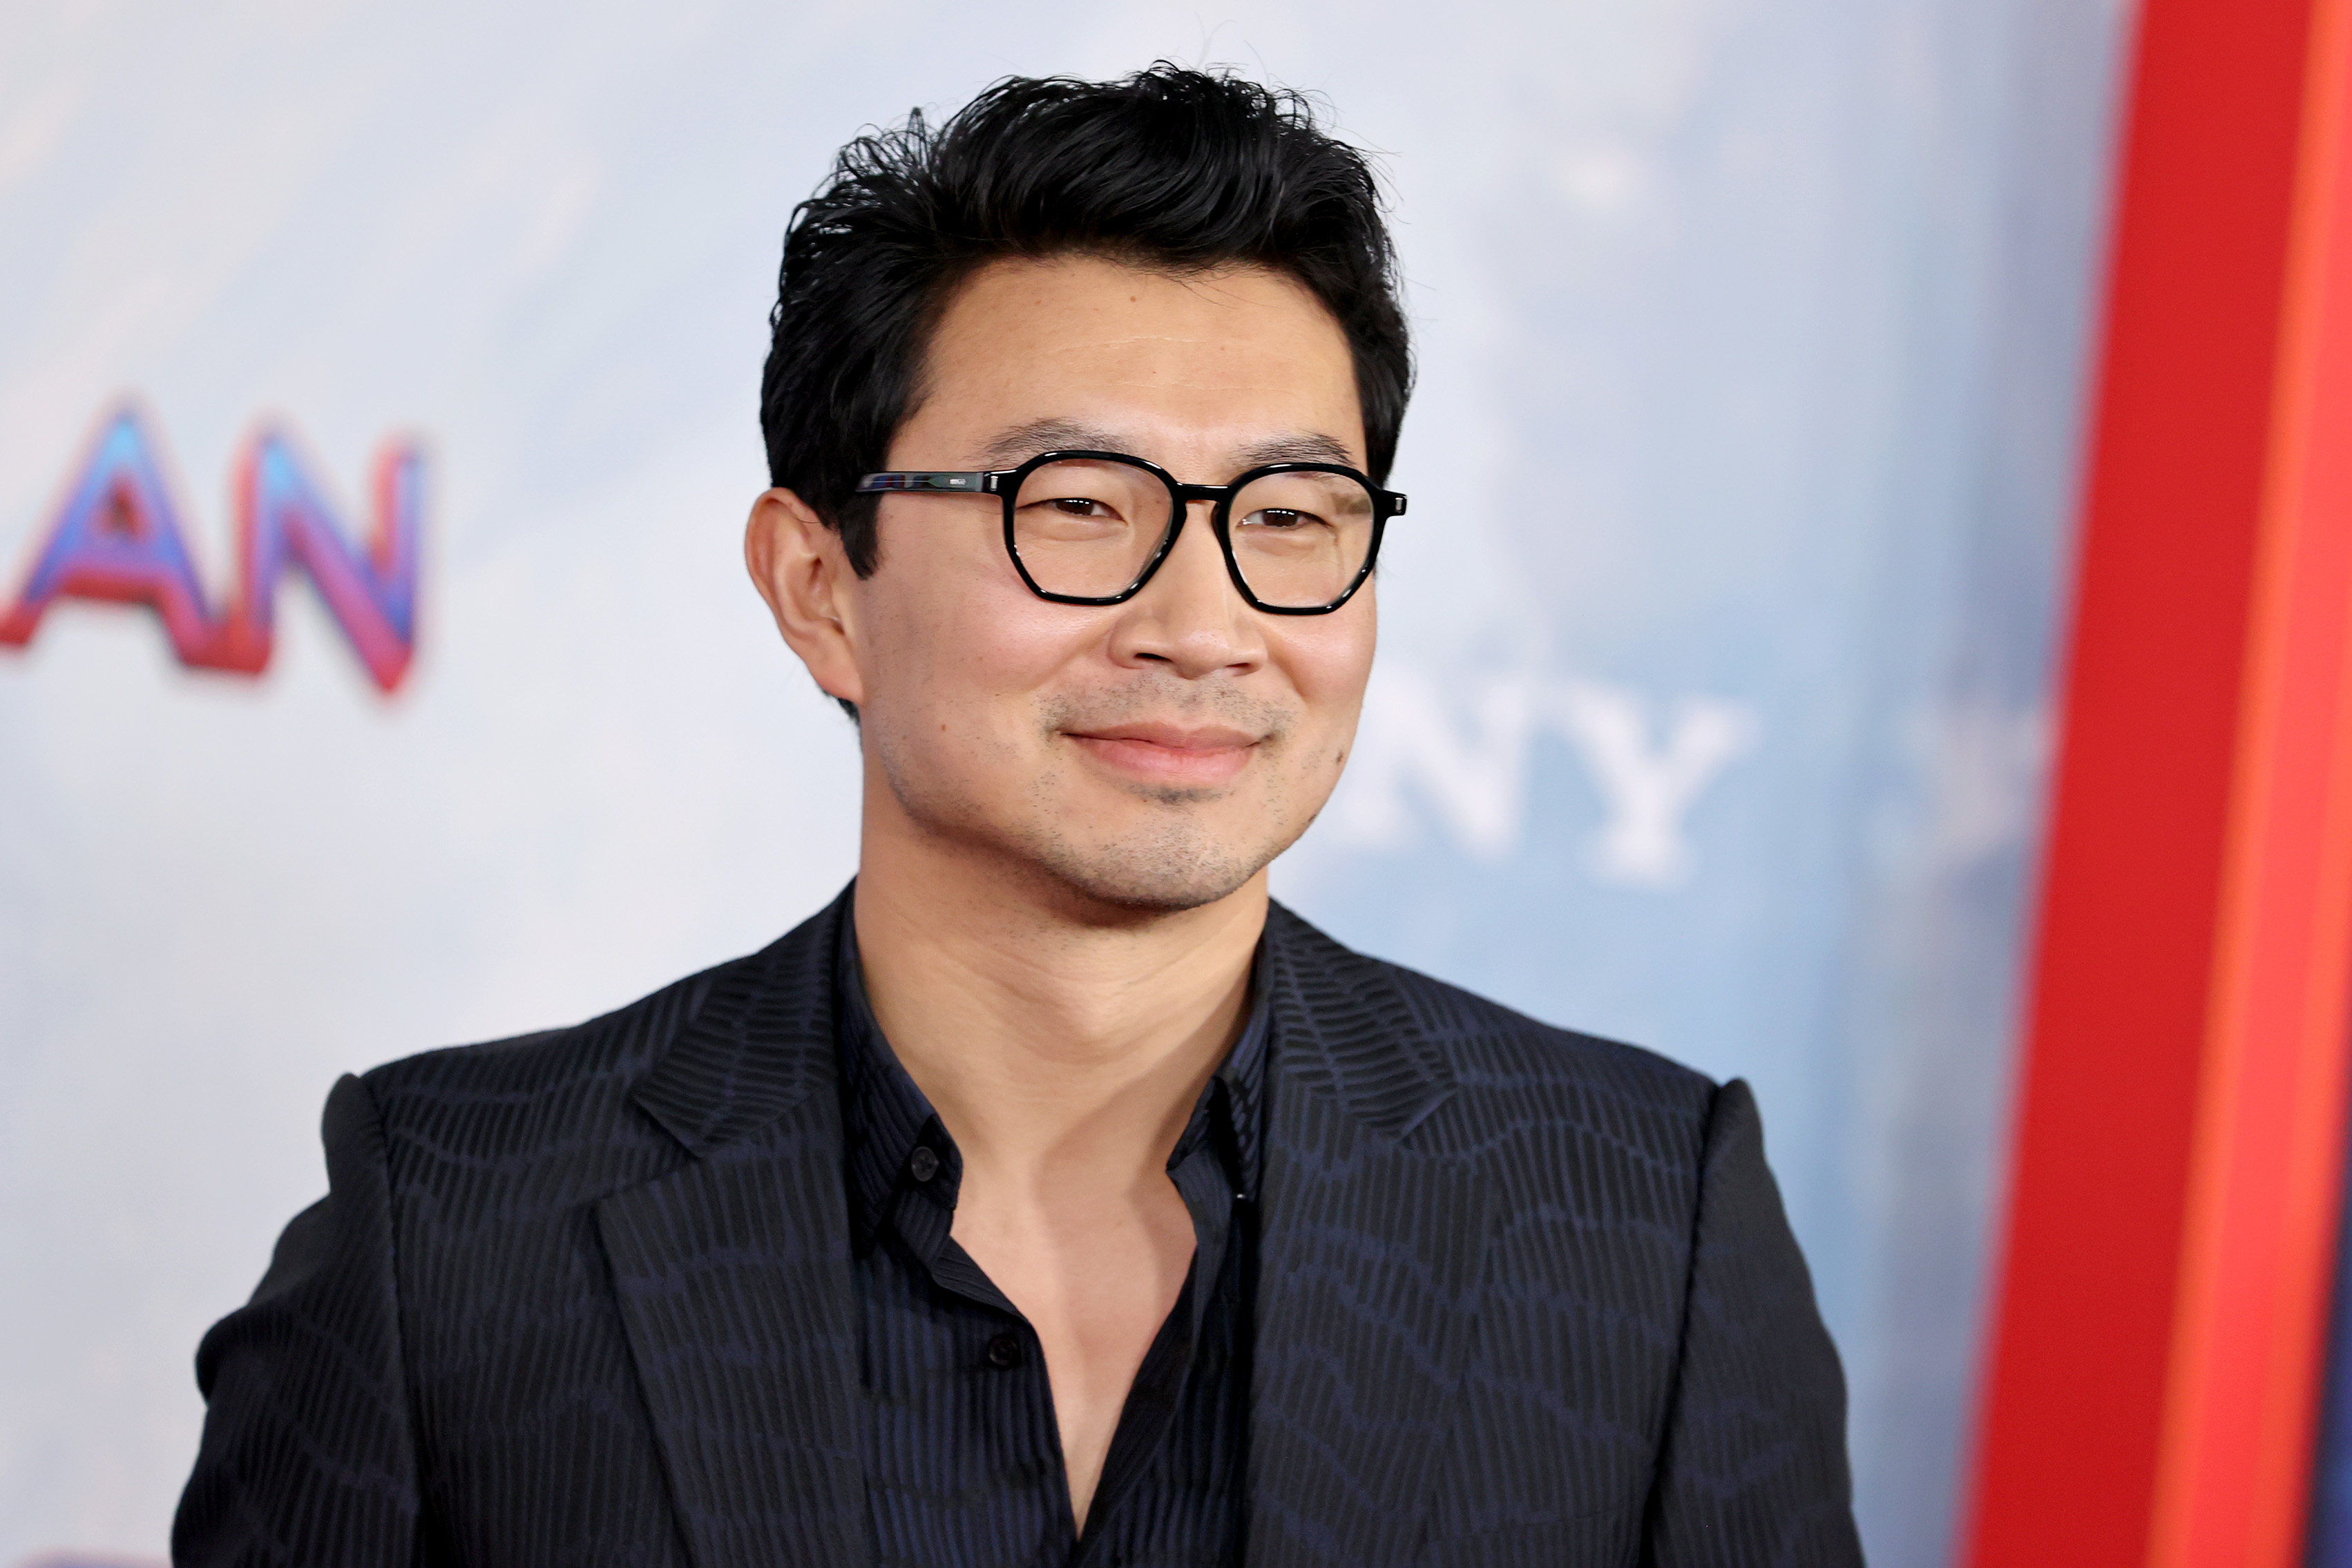 'Shang-Chi and the Legend of the Ten Rings' star Simu Liu wears a patterned black suit over a black button-up shirt and black-framed glasses.